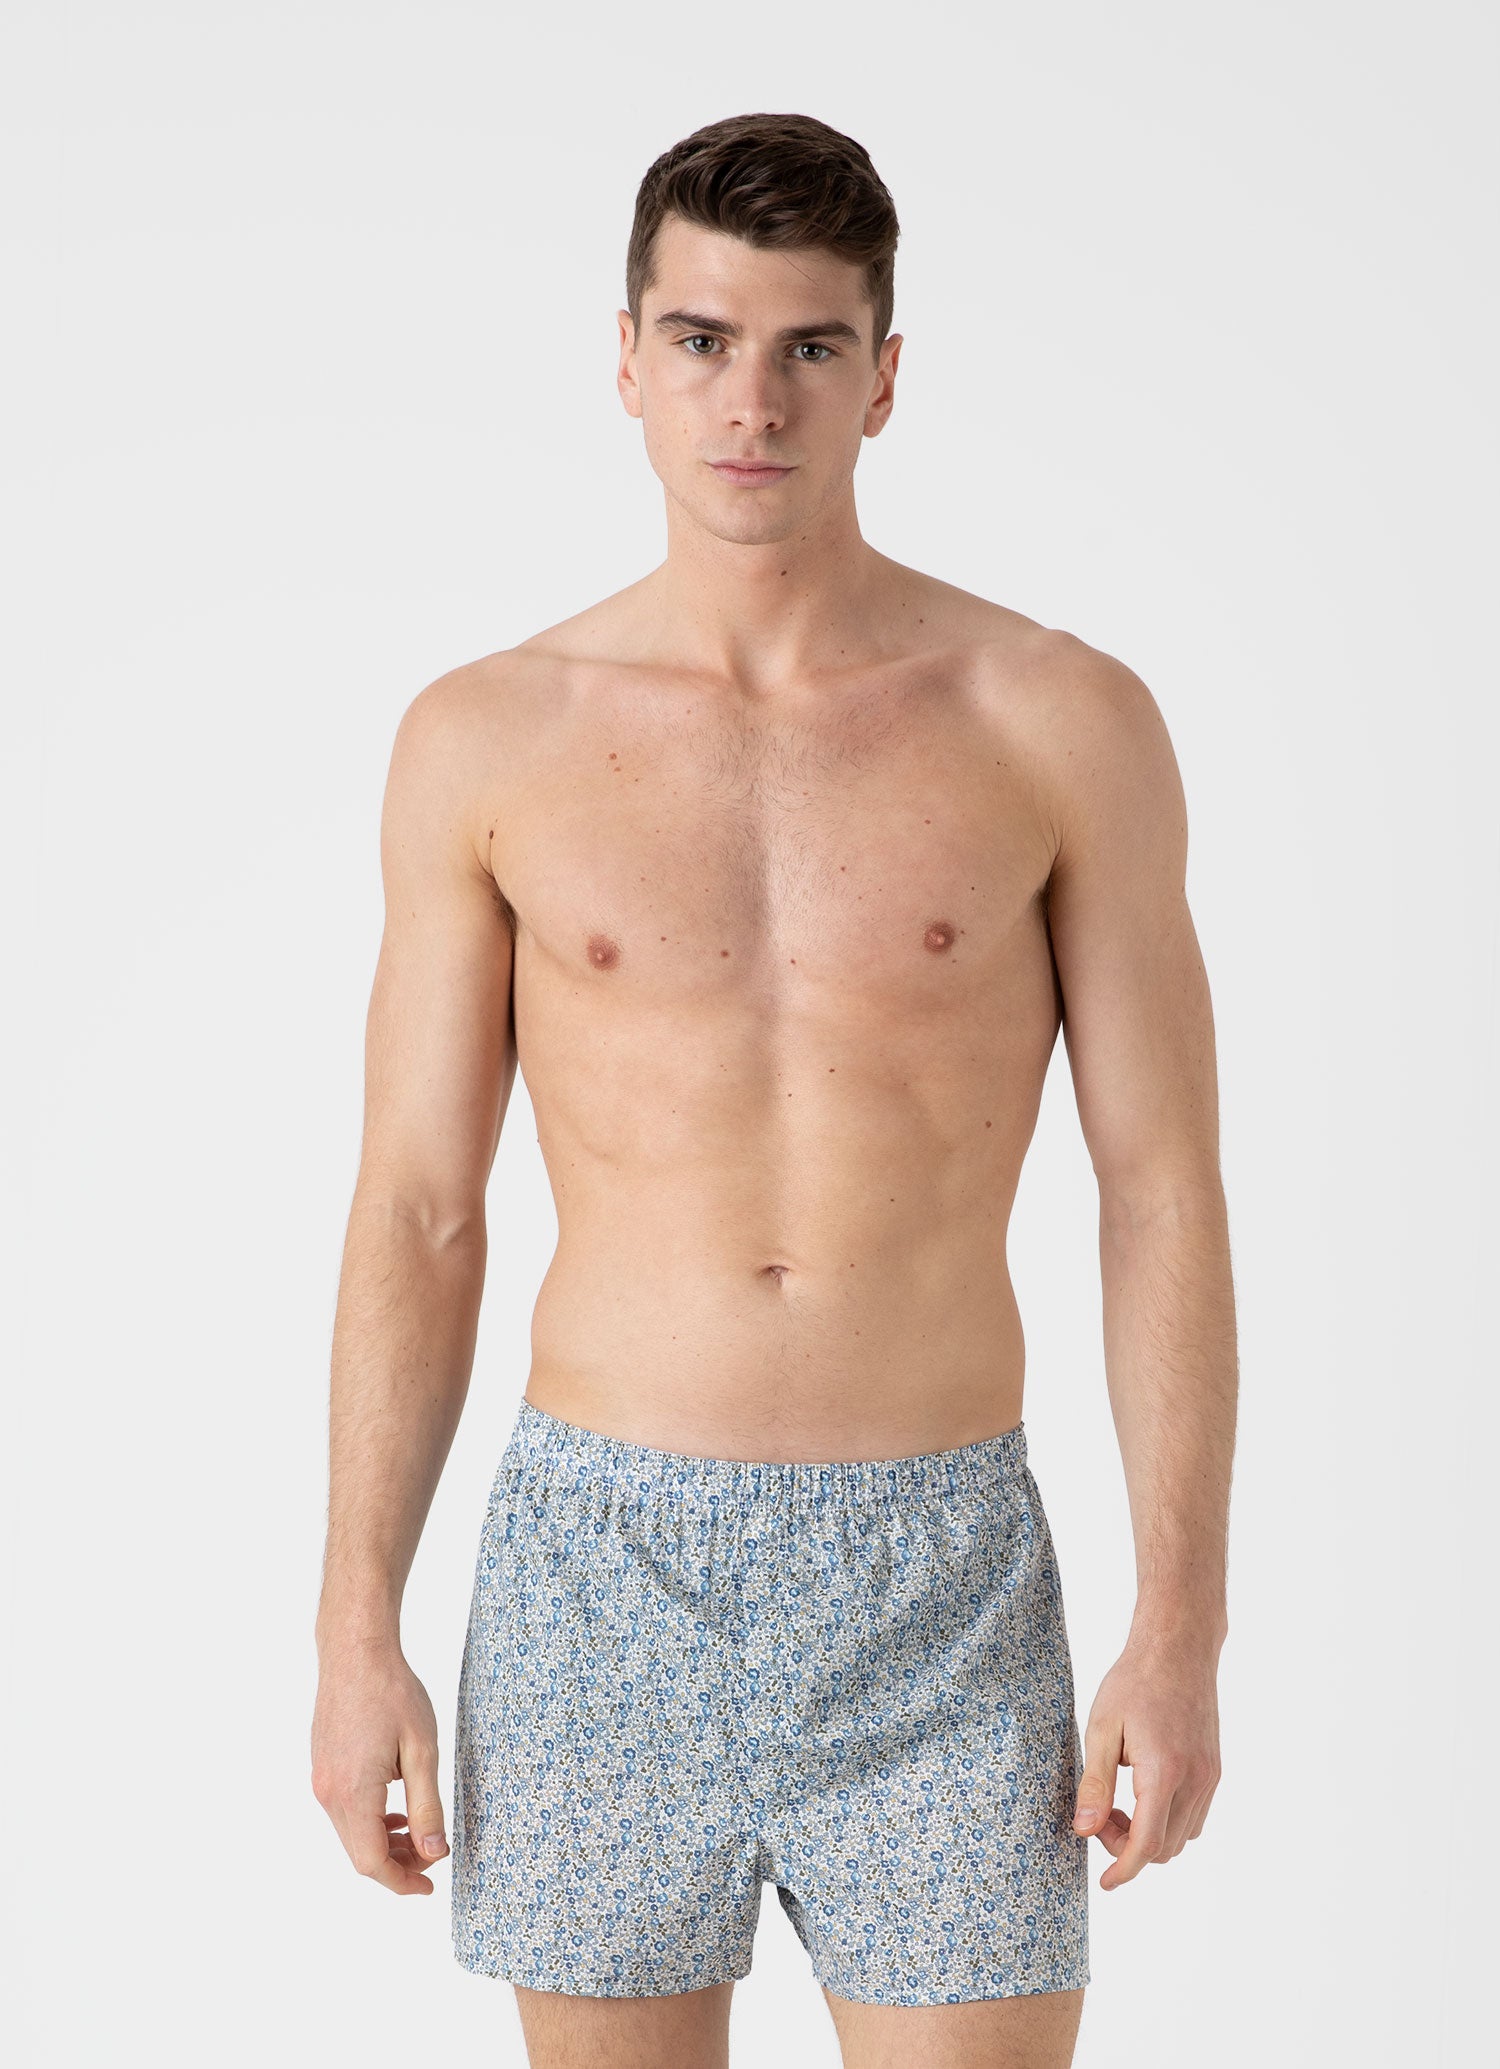 Men's Classic Boxer Shorts in Liberty Fabric in Blue Floral Ditsy